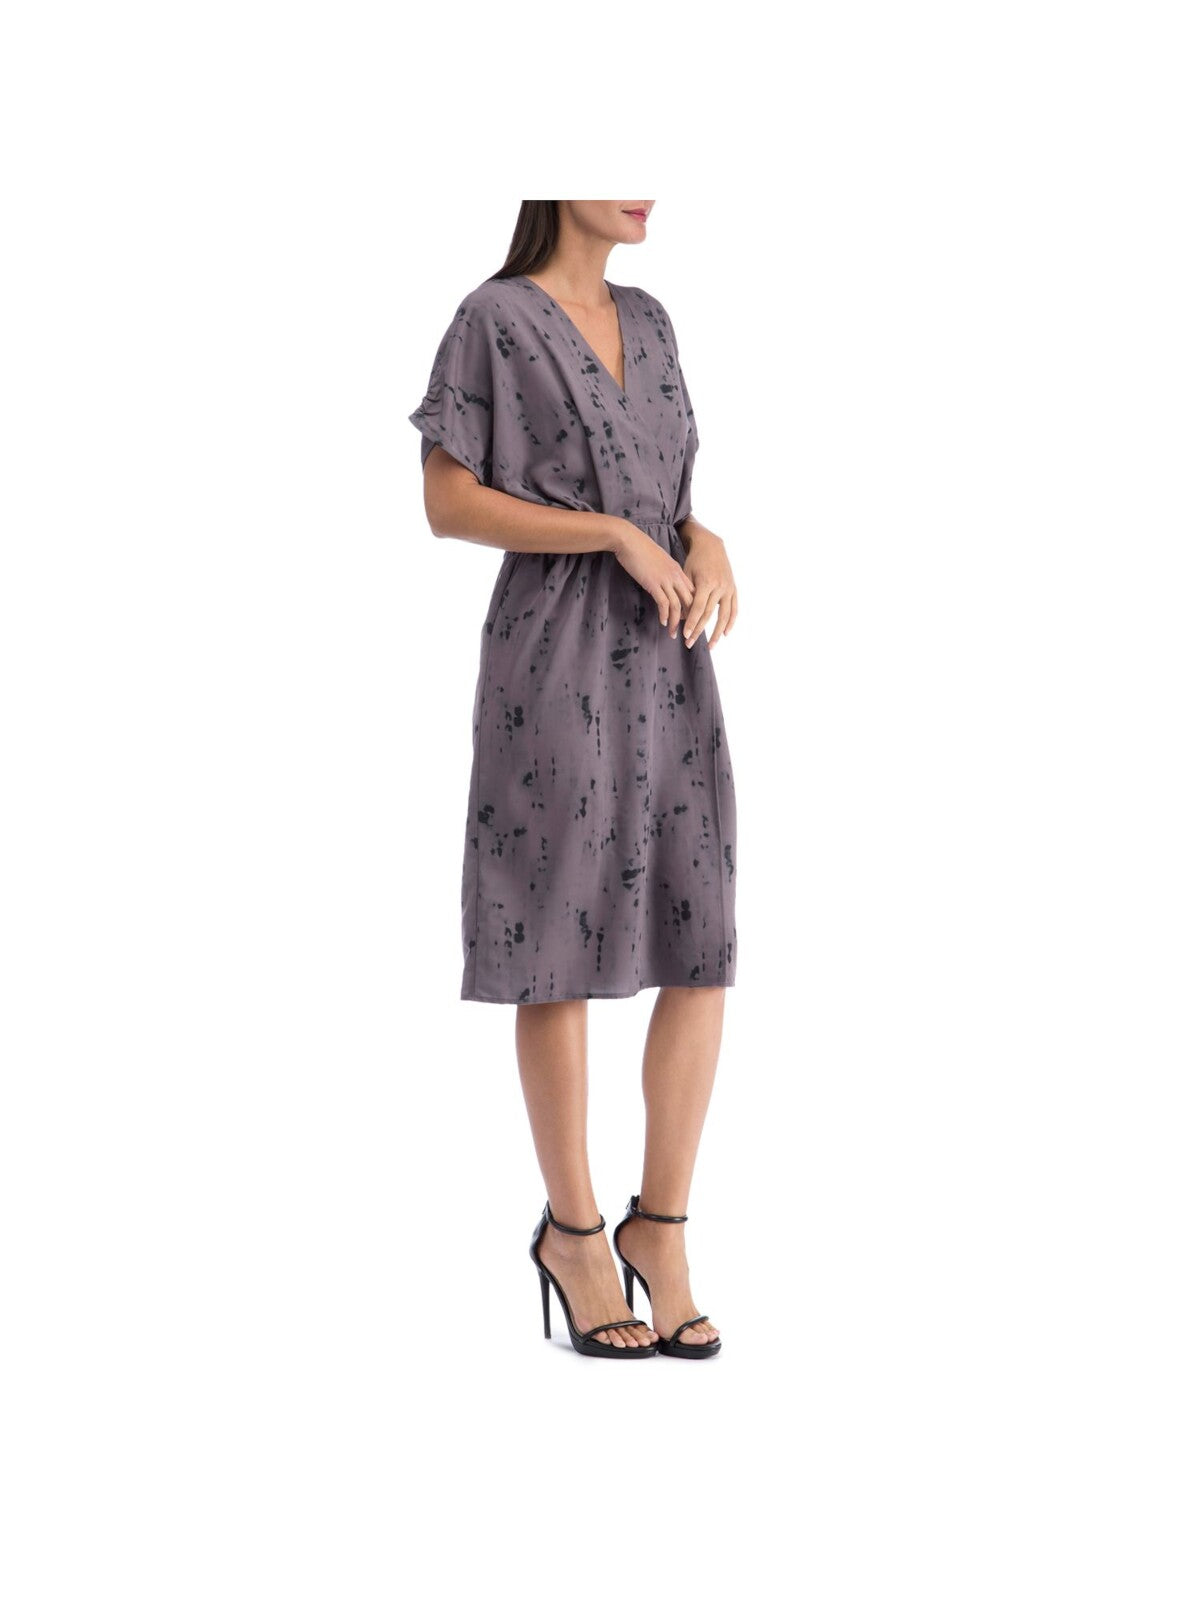 COLLECTION BY BOBEAU Womens Gray Printed Short Sleeve Surplice Neckline Below The Knee Cocktail Faux Wrap Dress S